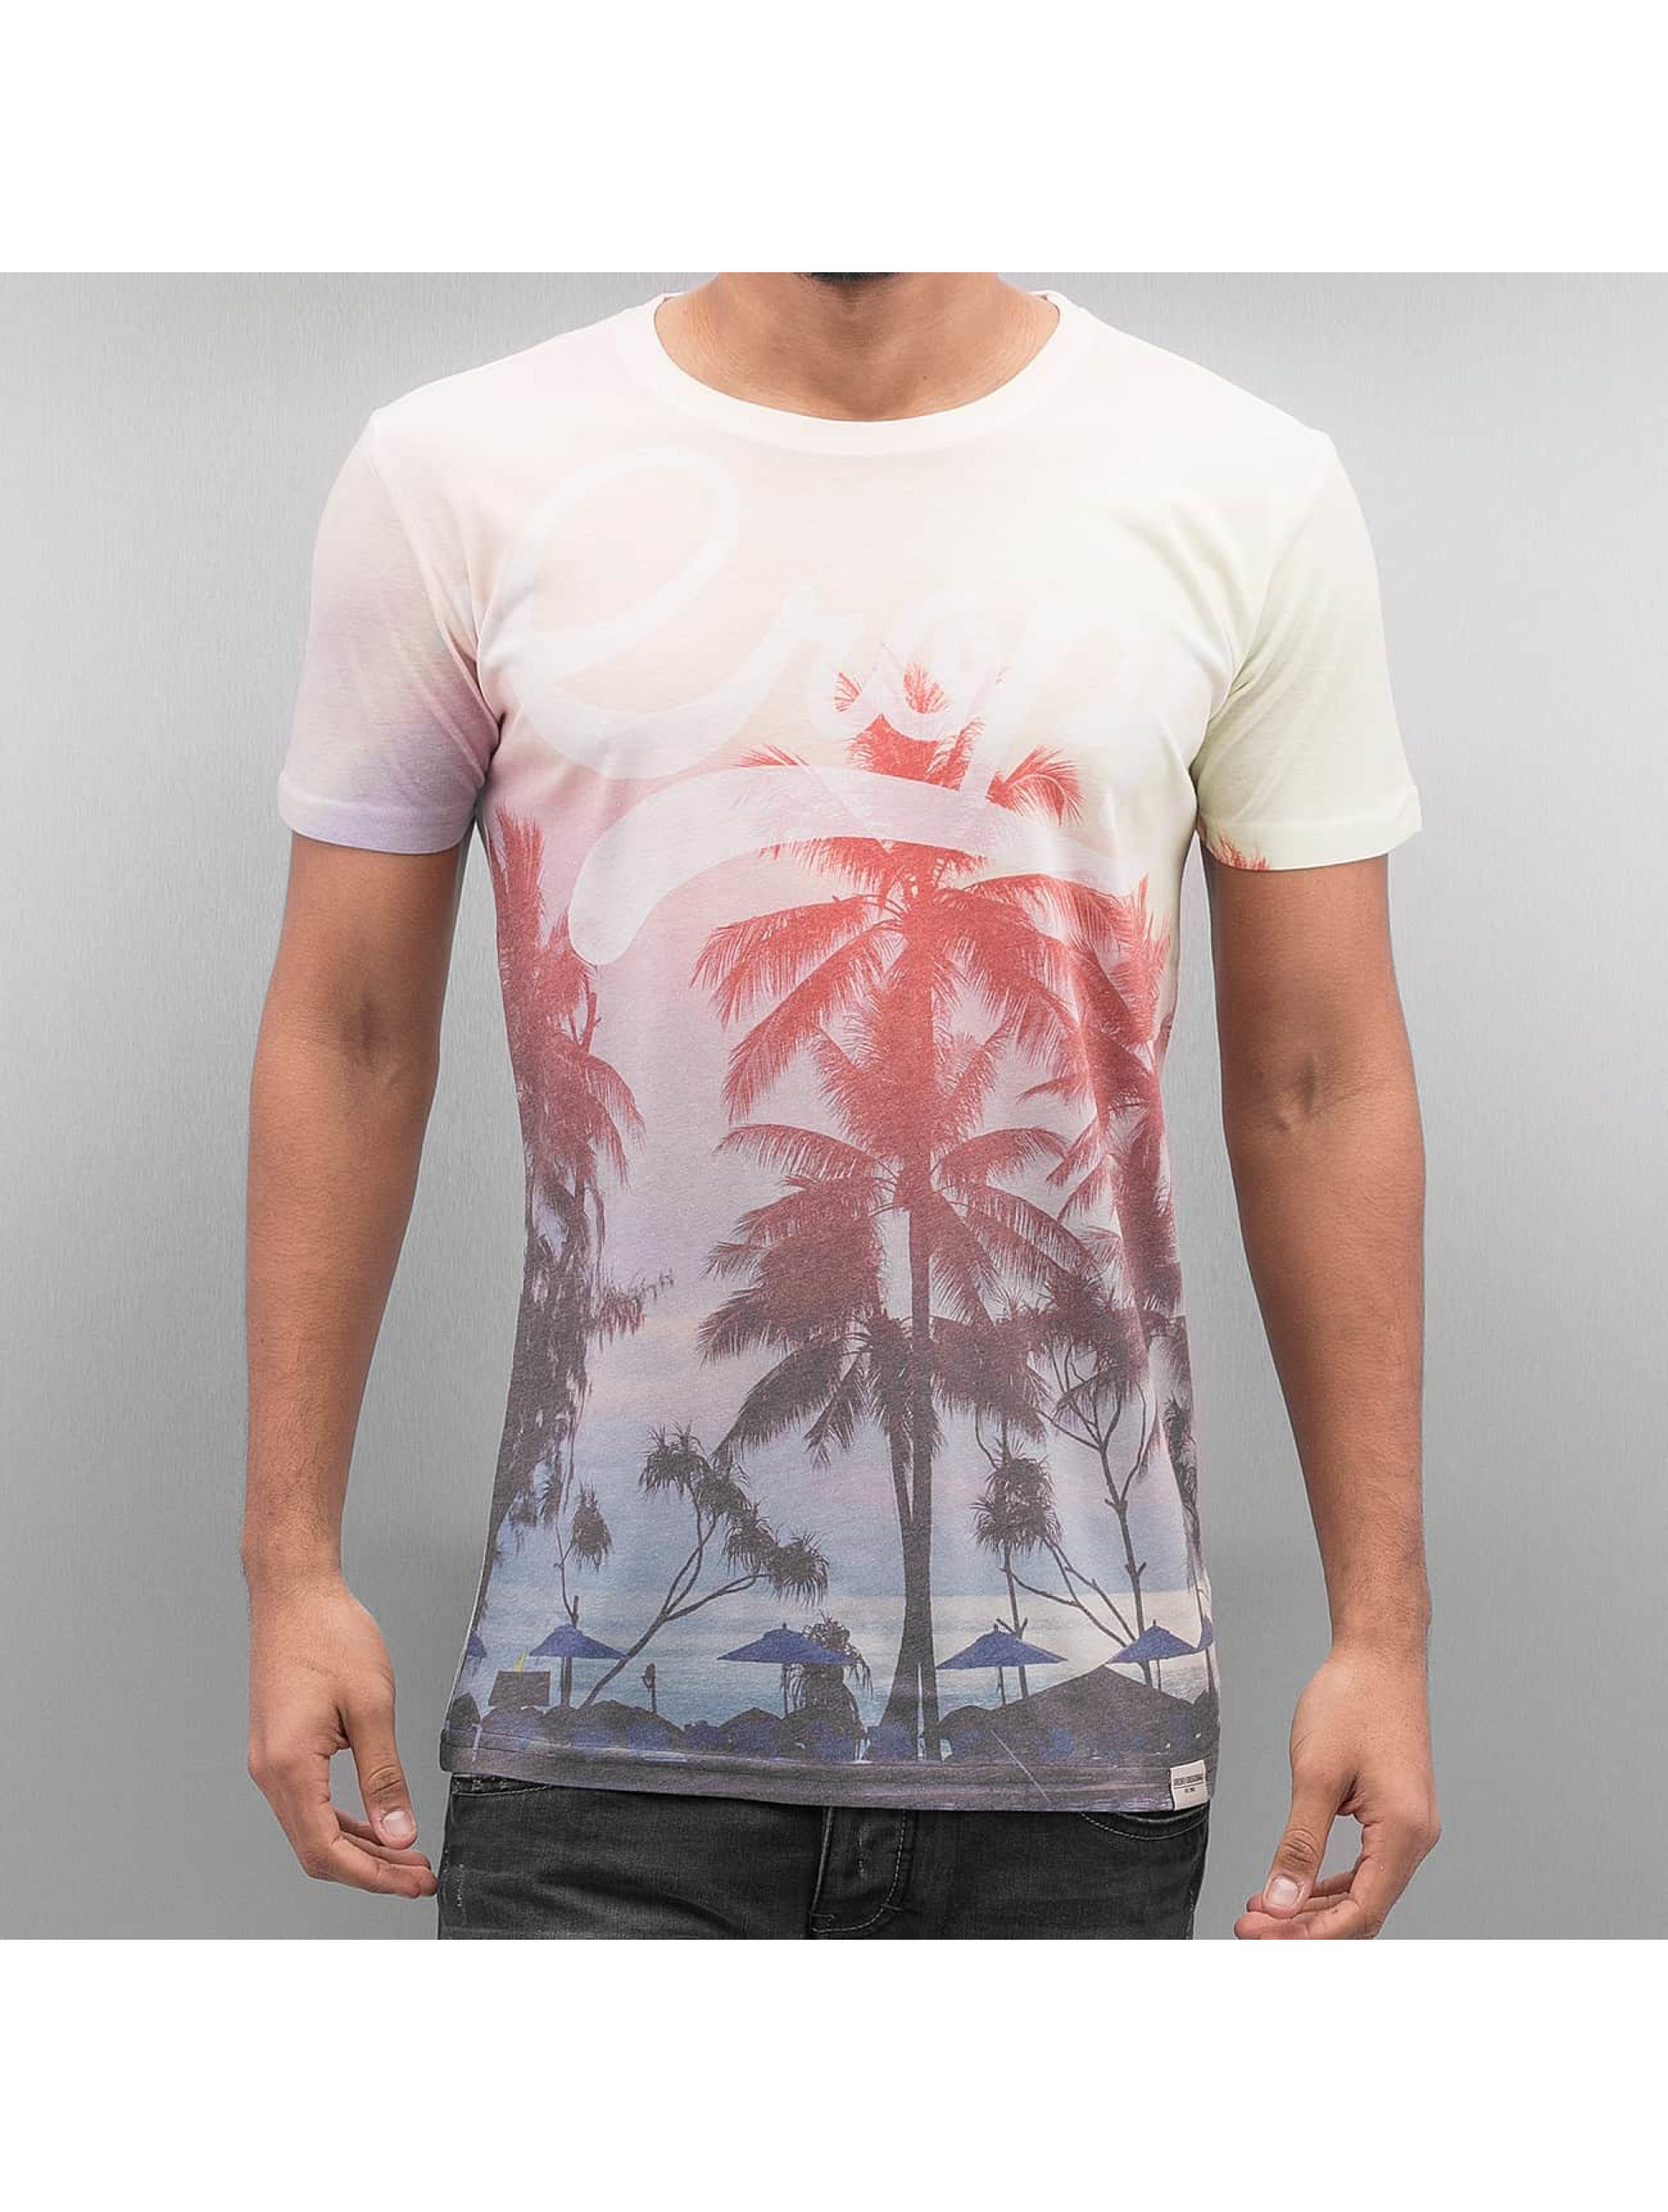 T-Shirt Palms in bunt